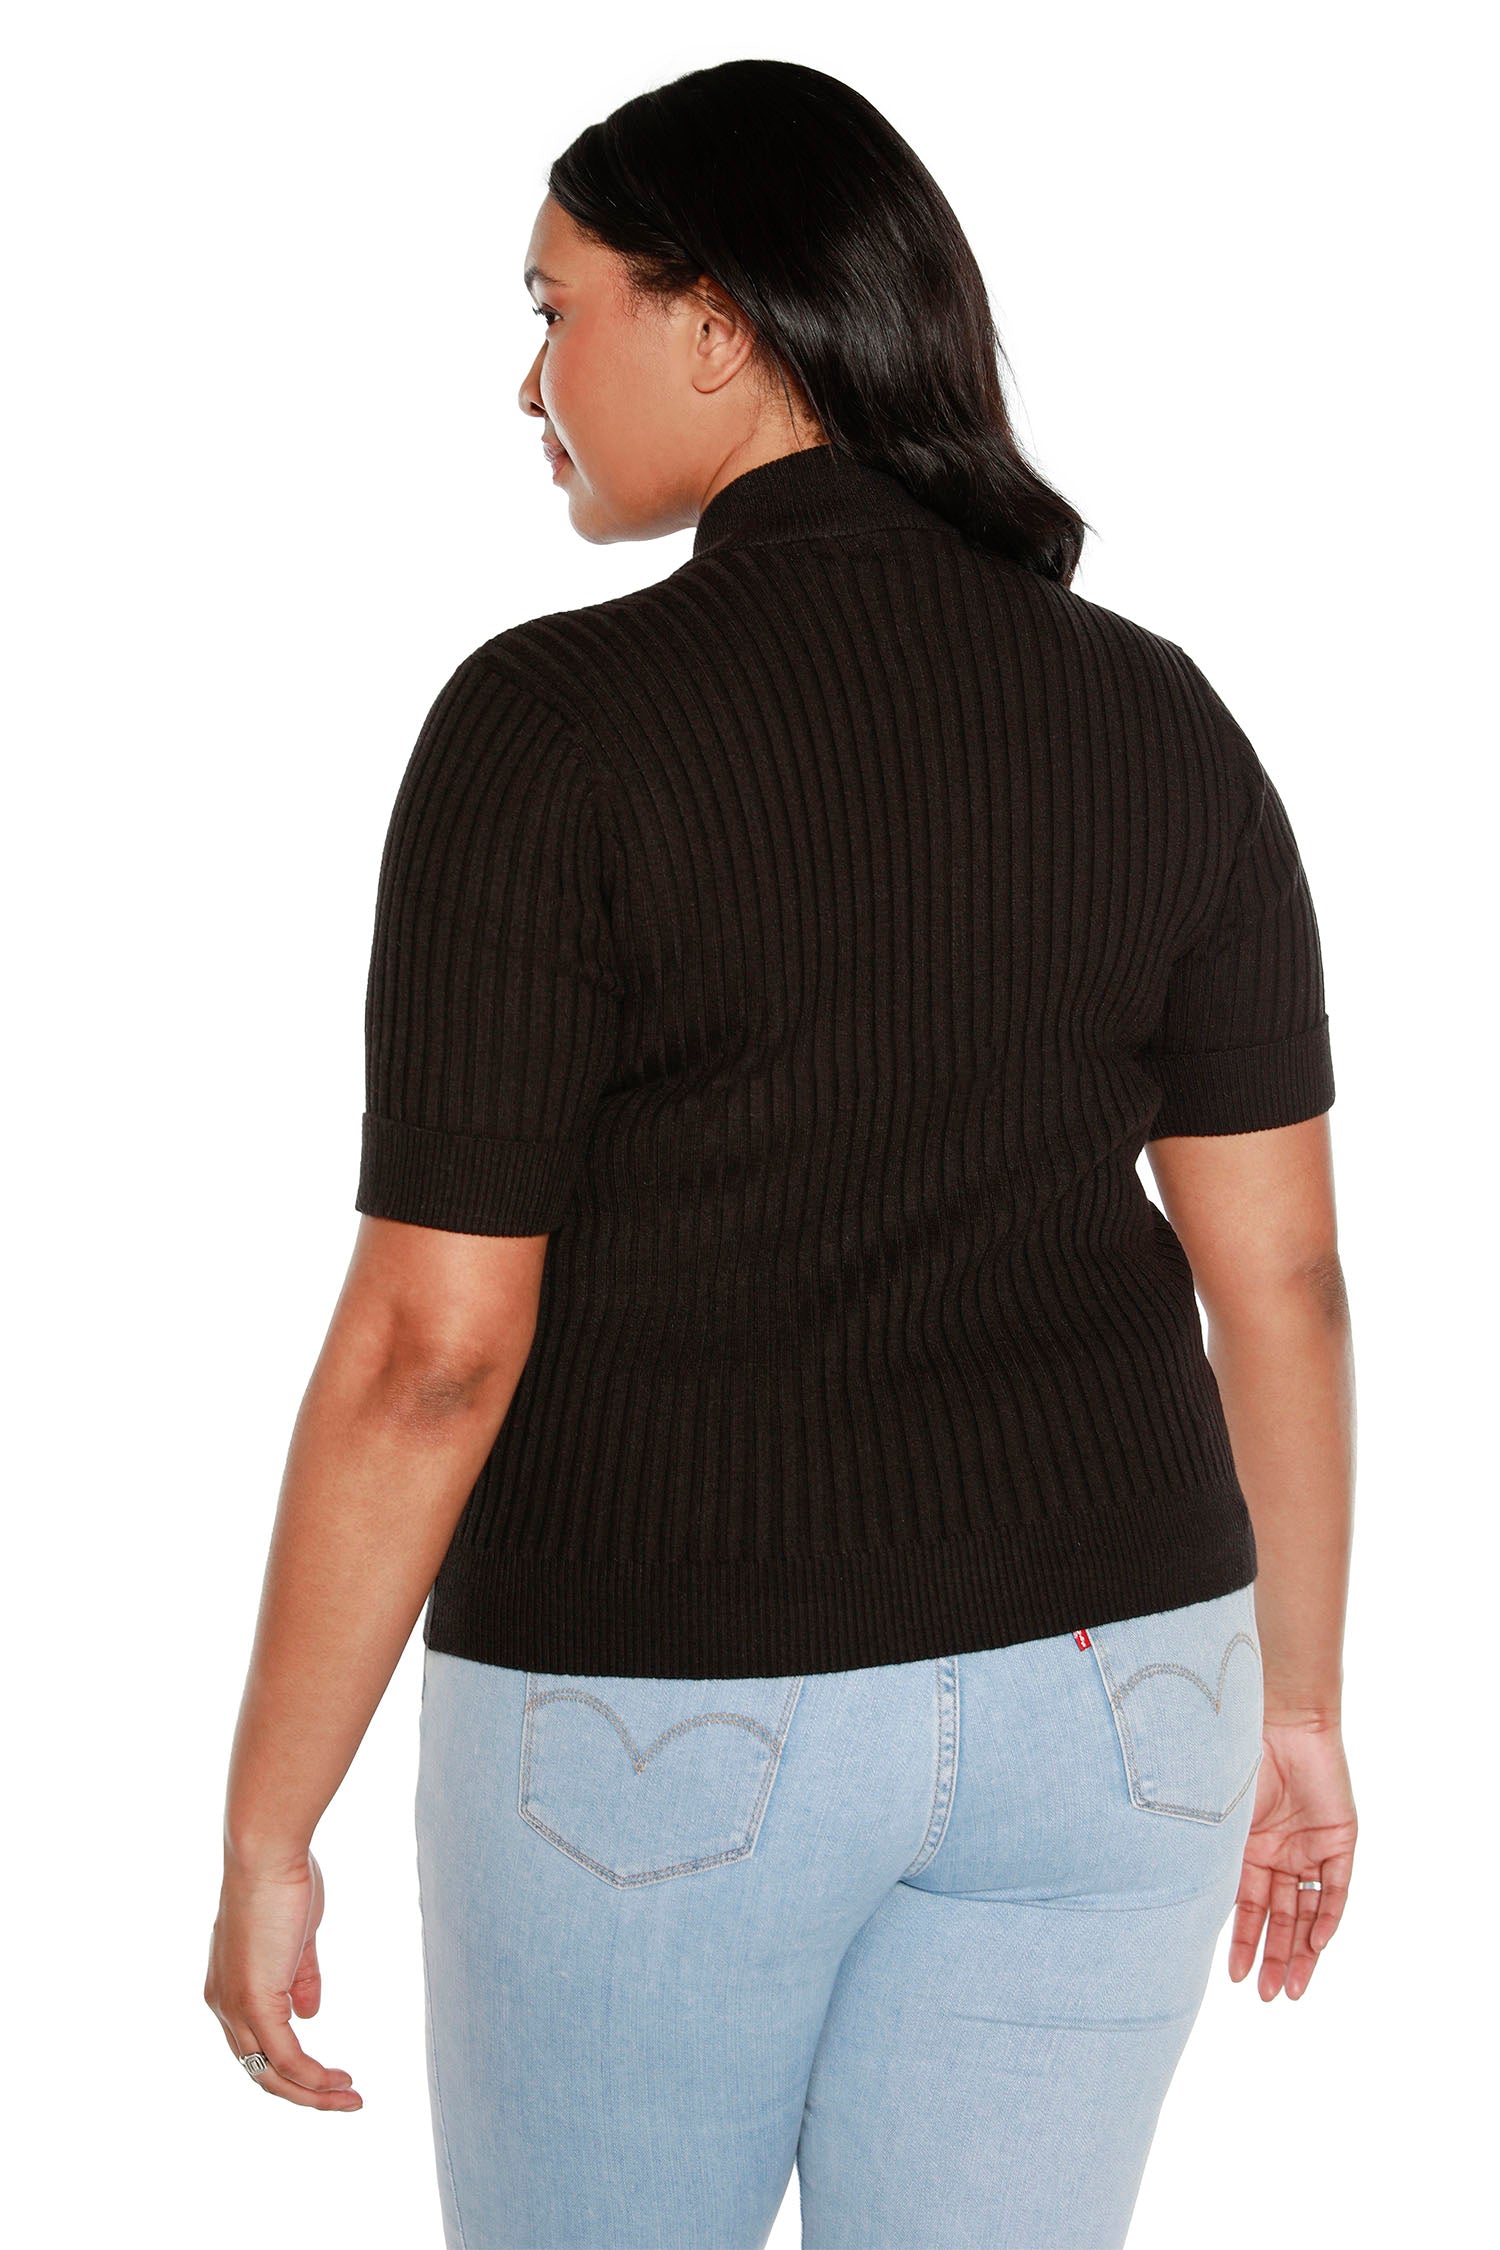 NEW COLORS Women's Pullover Sweater Top with Front Quarter Zip in a Ribbed Knit | Curvy